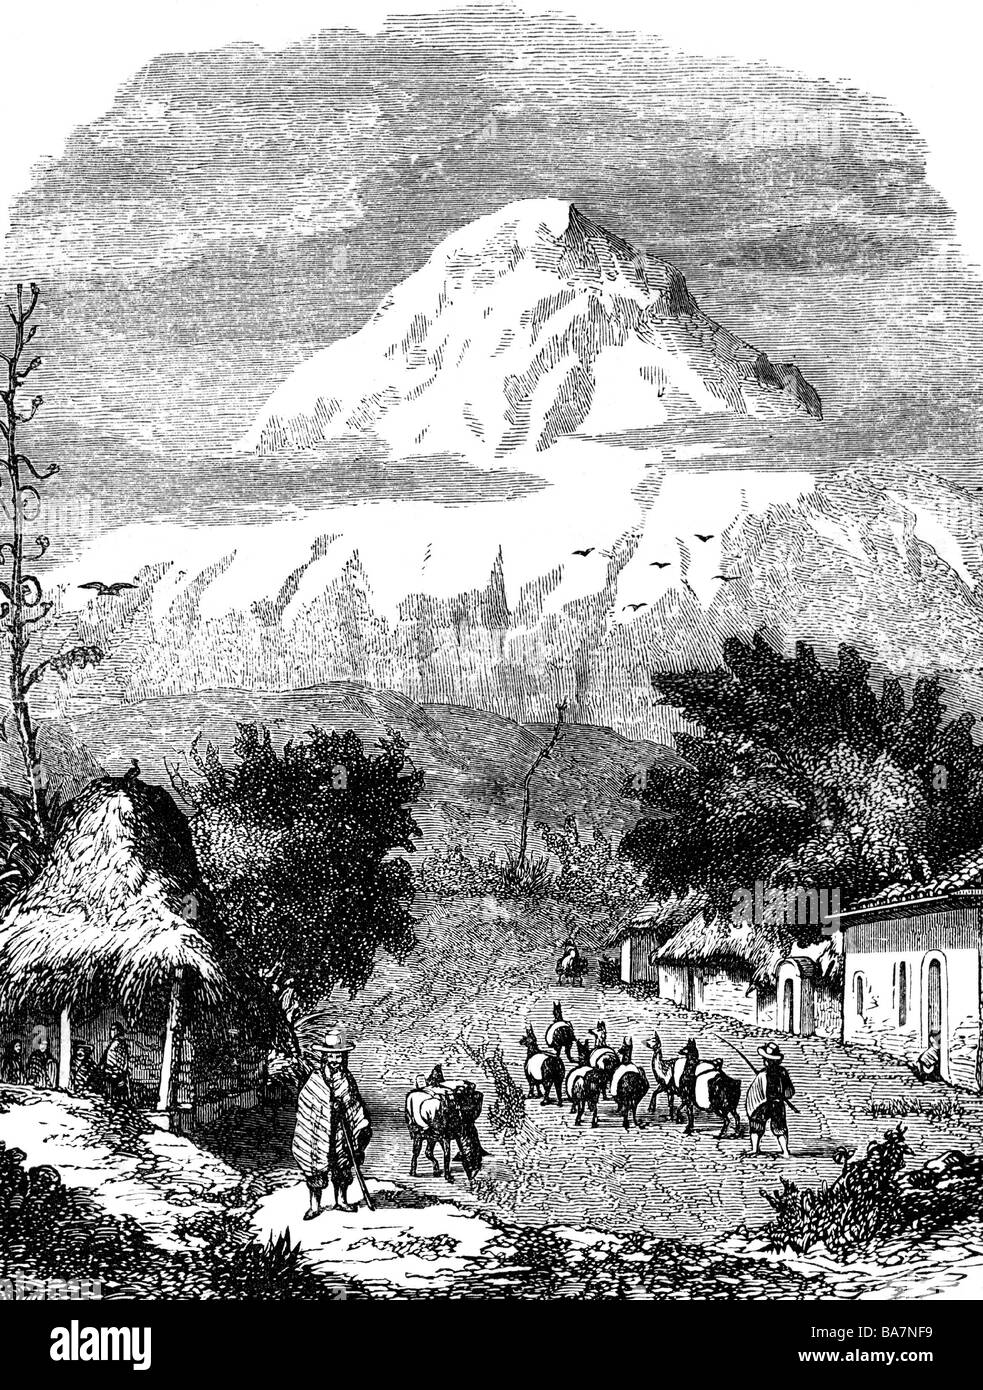 Humboldt, Alexander von, 14.9.1769 - 6.5.1859, German scientist (naturalist and geographer), resting on foot of mount Chimborazo, Artist's Copyright has not to be cleared Stock Photo